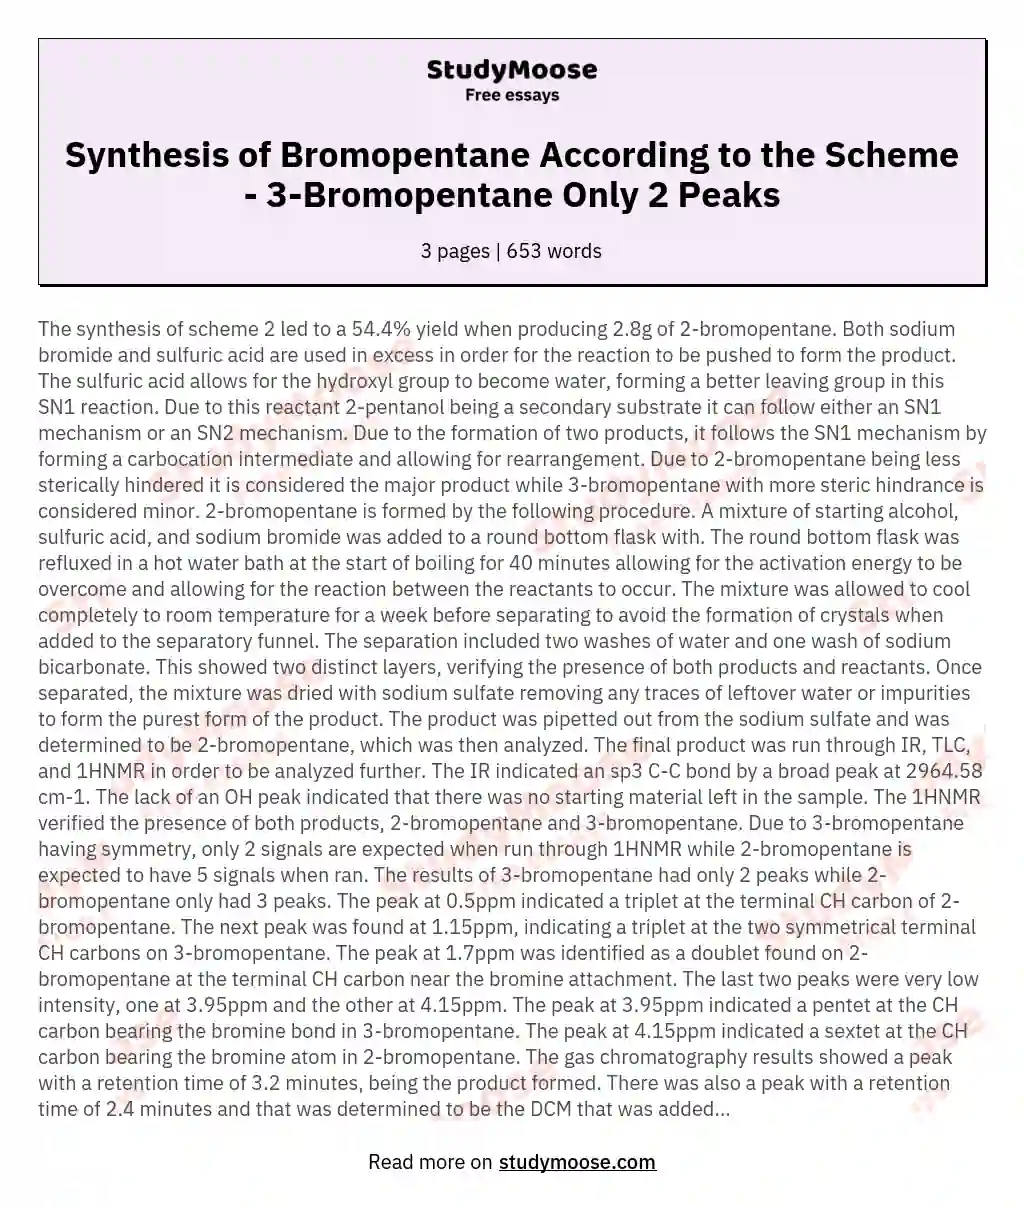 Synthesis of Bromopentane According to the Scheme - 3-Bromopentane Only 2 Peaks essay